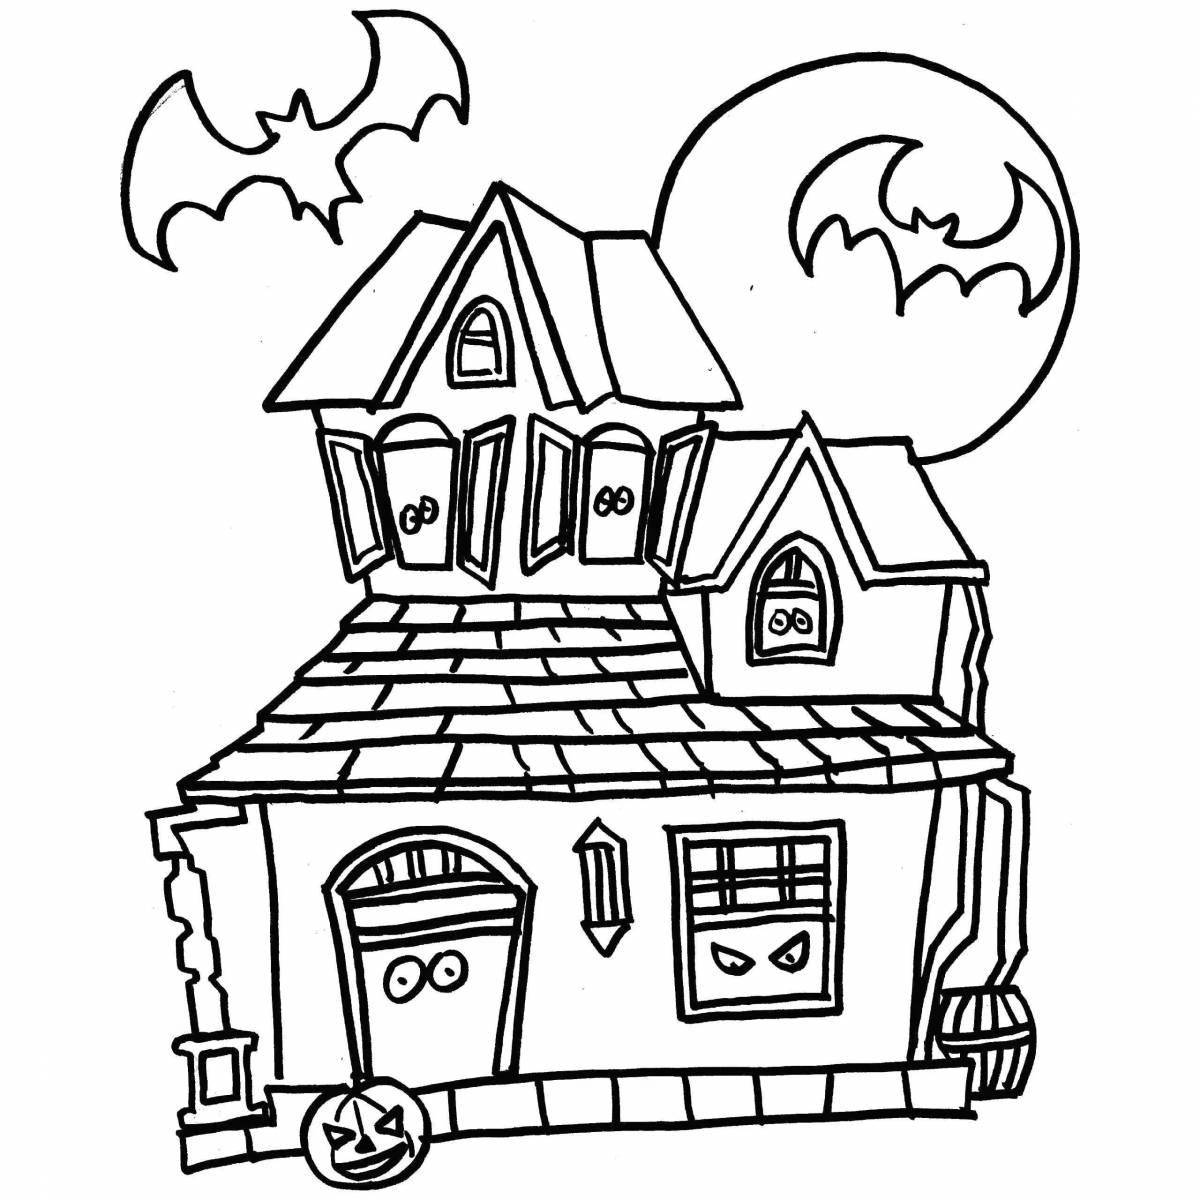 Coloring cute house for boys